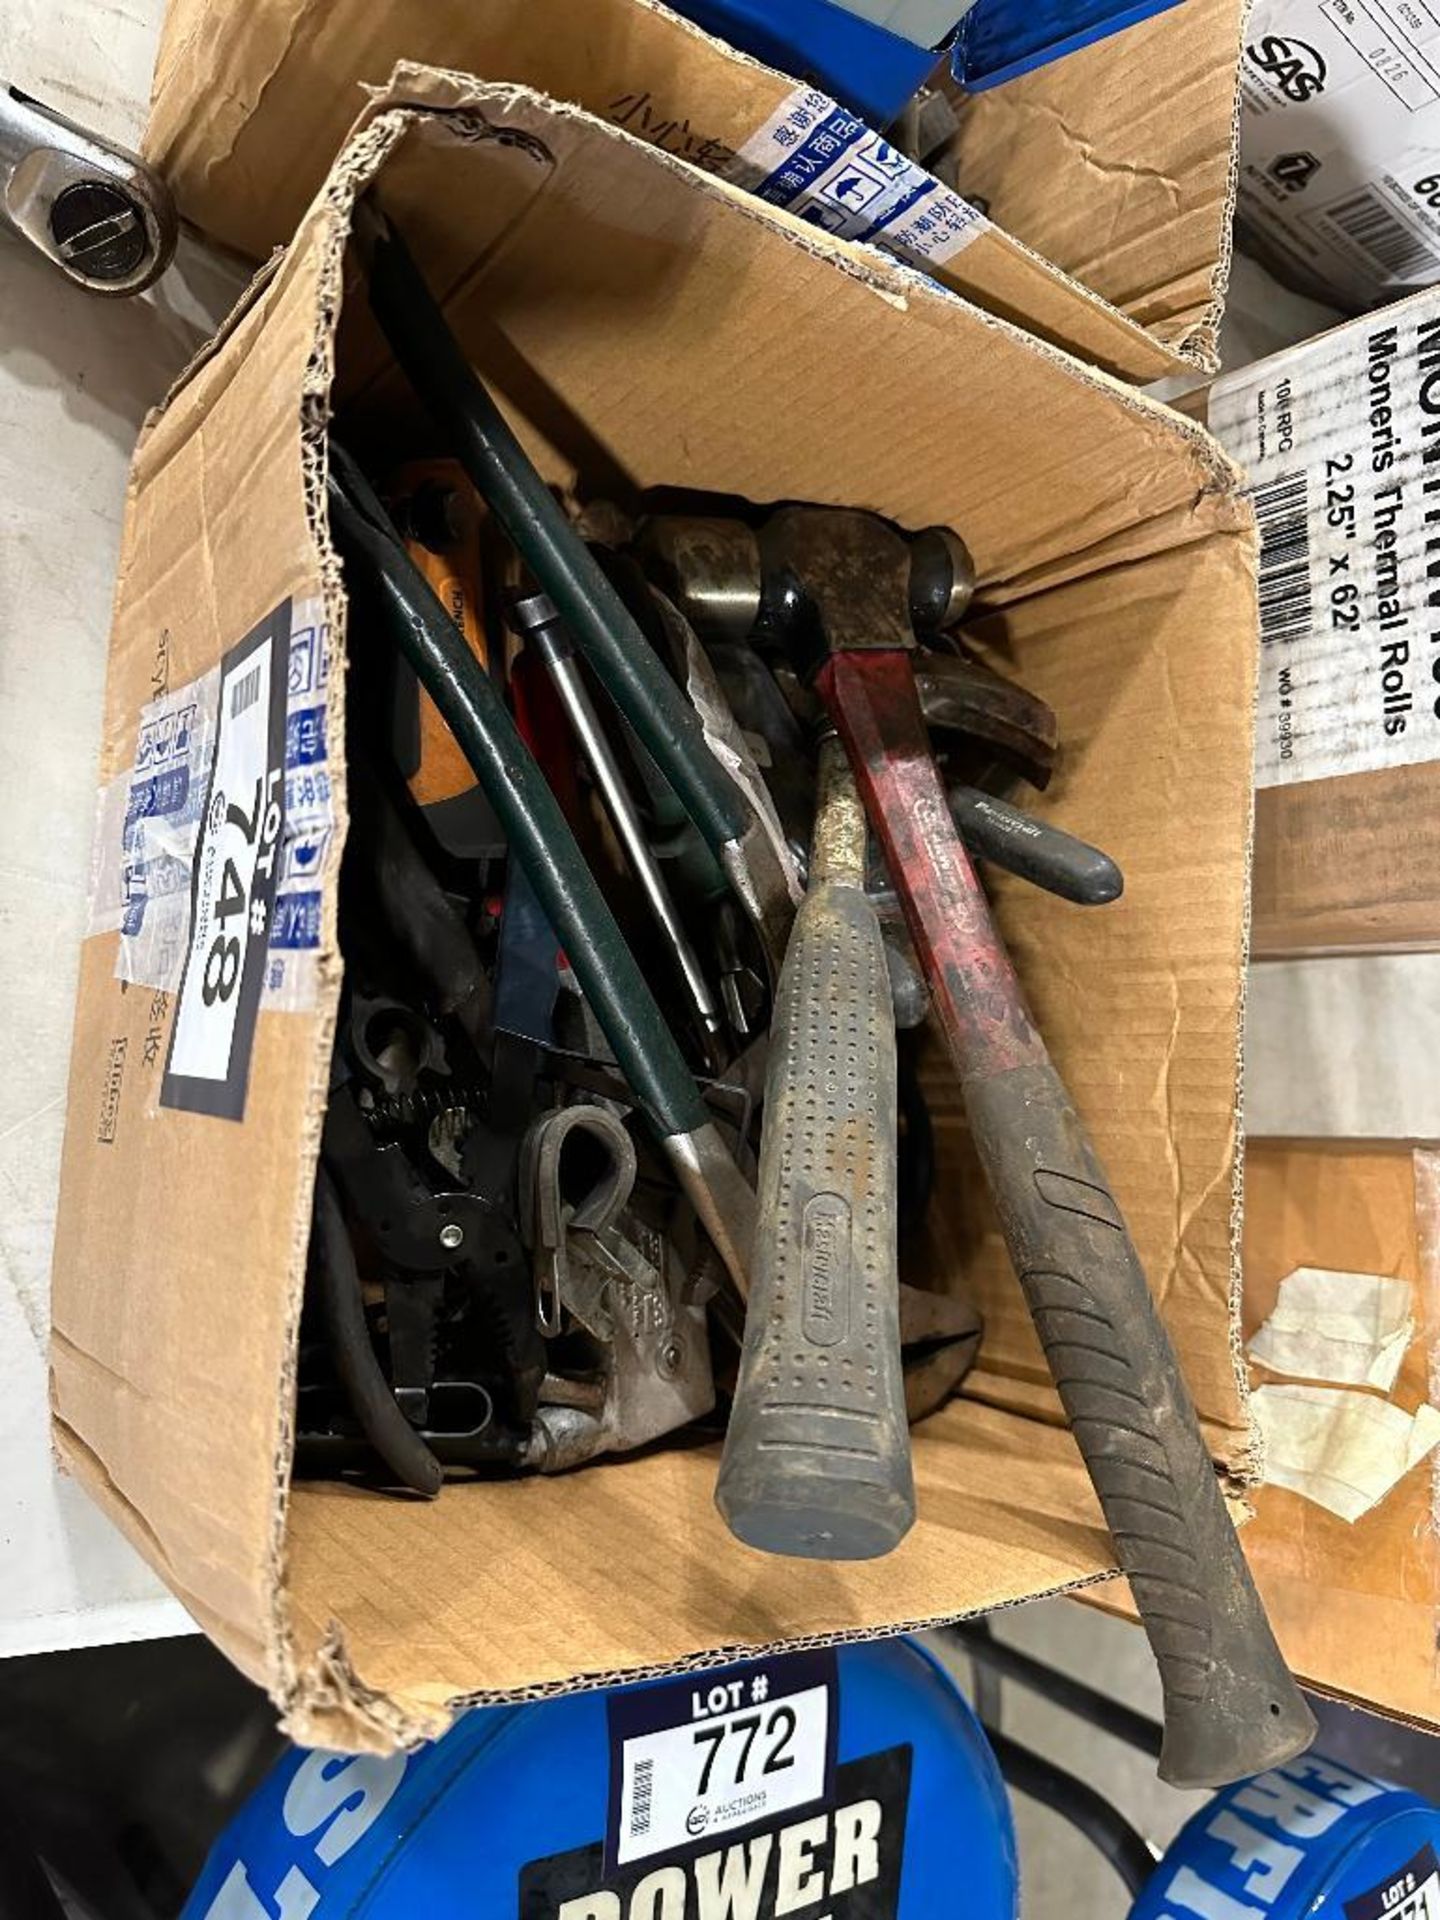 Lot of Asst. Hammers, Pliers, Wire Strippers, etc. - Image 4 of 5